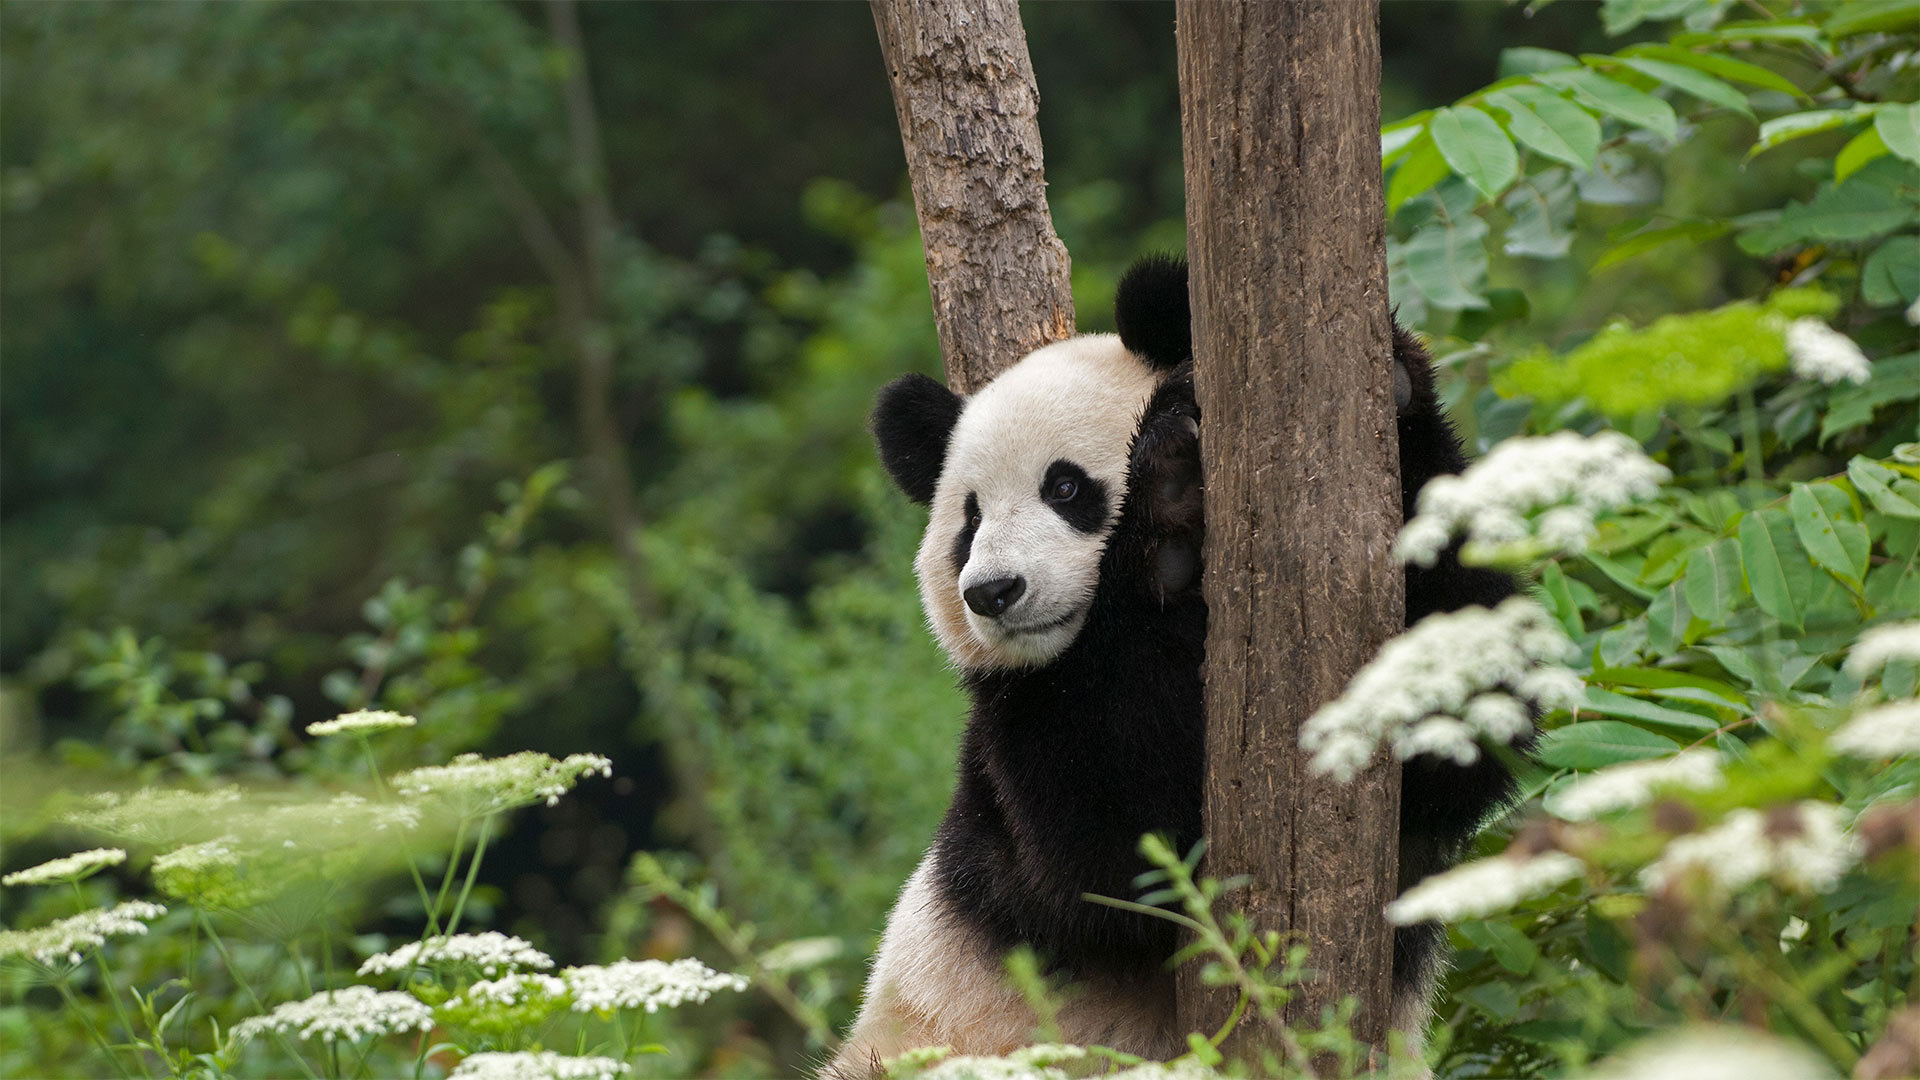 Giant panda in Wolong National Nature Reserve, Sichuan, China - Katherine Feng